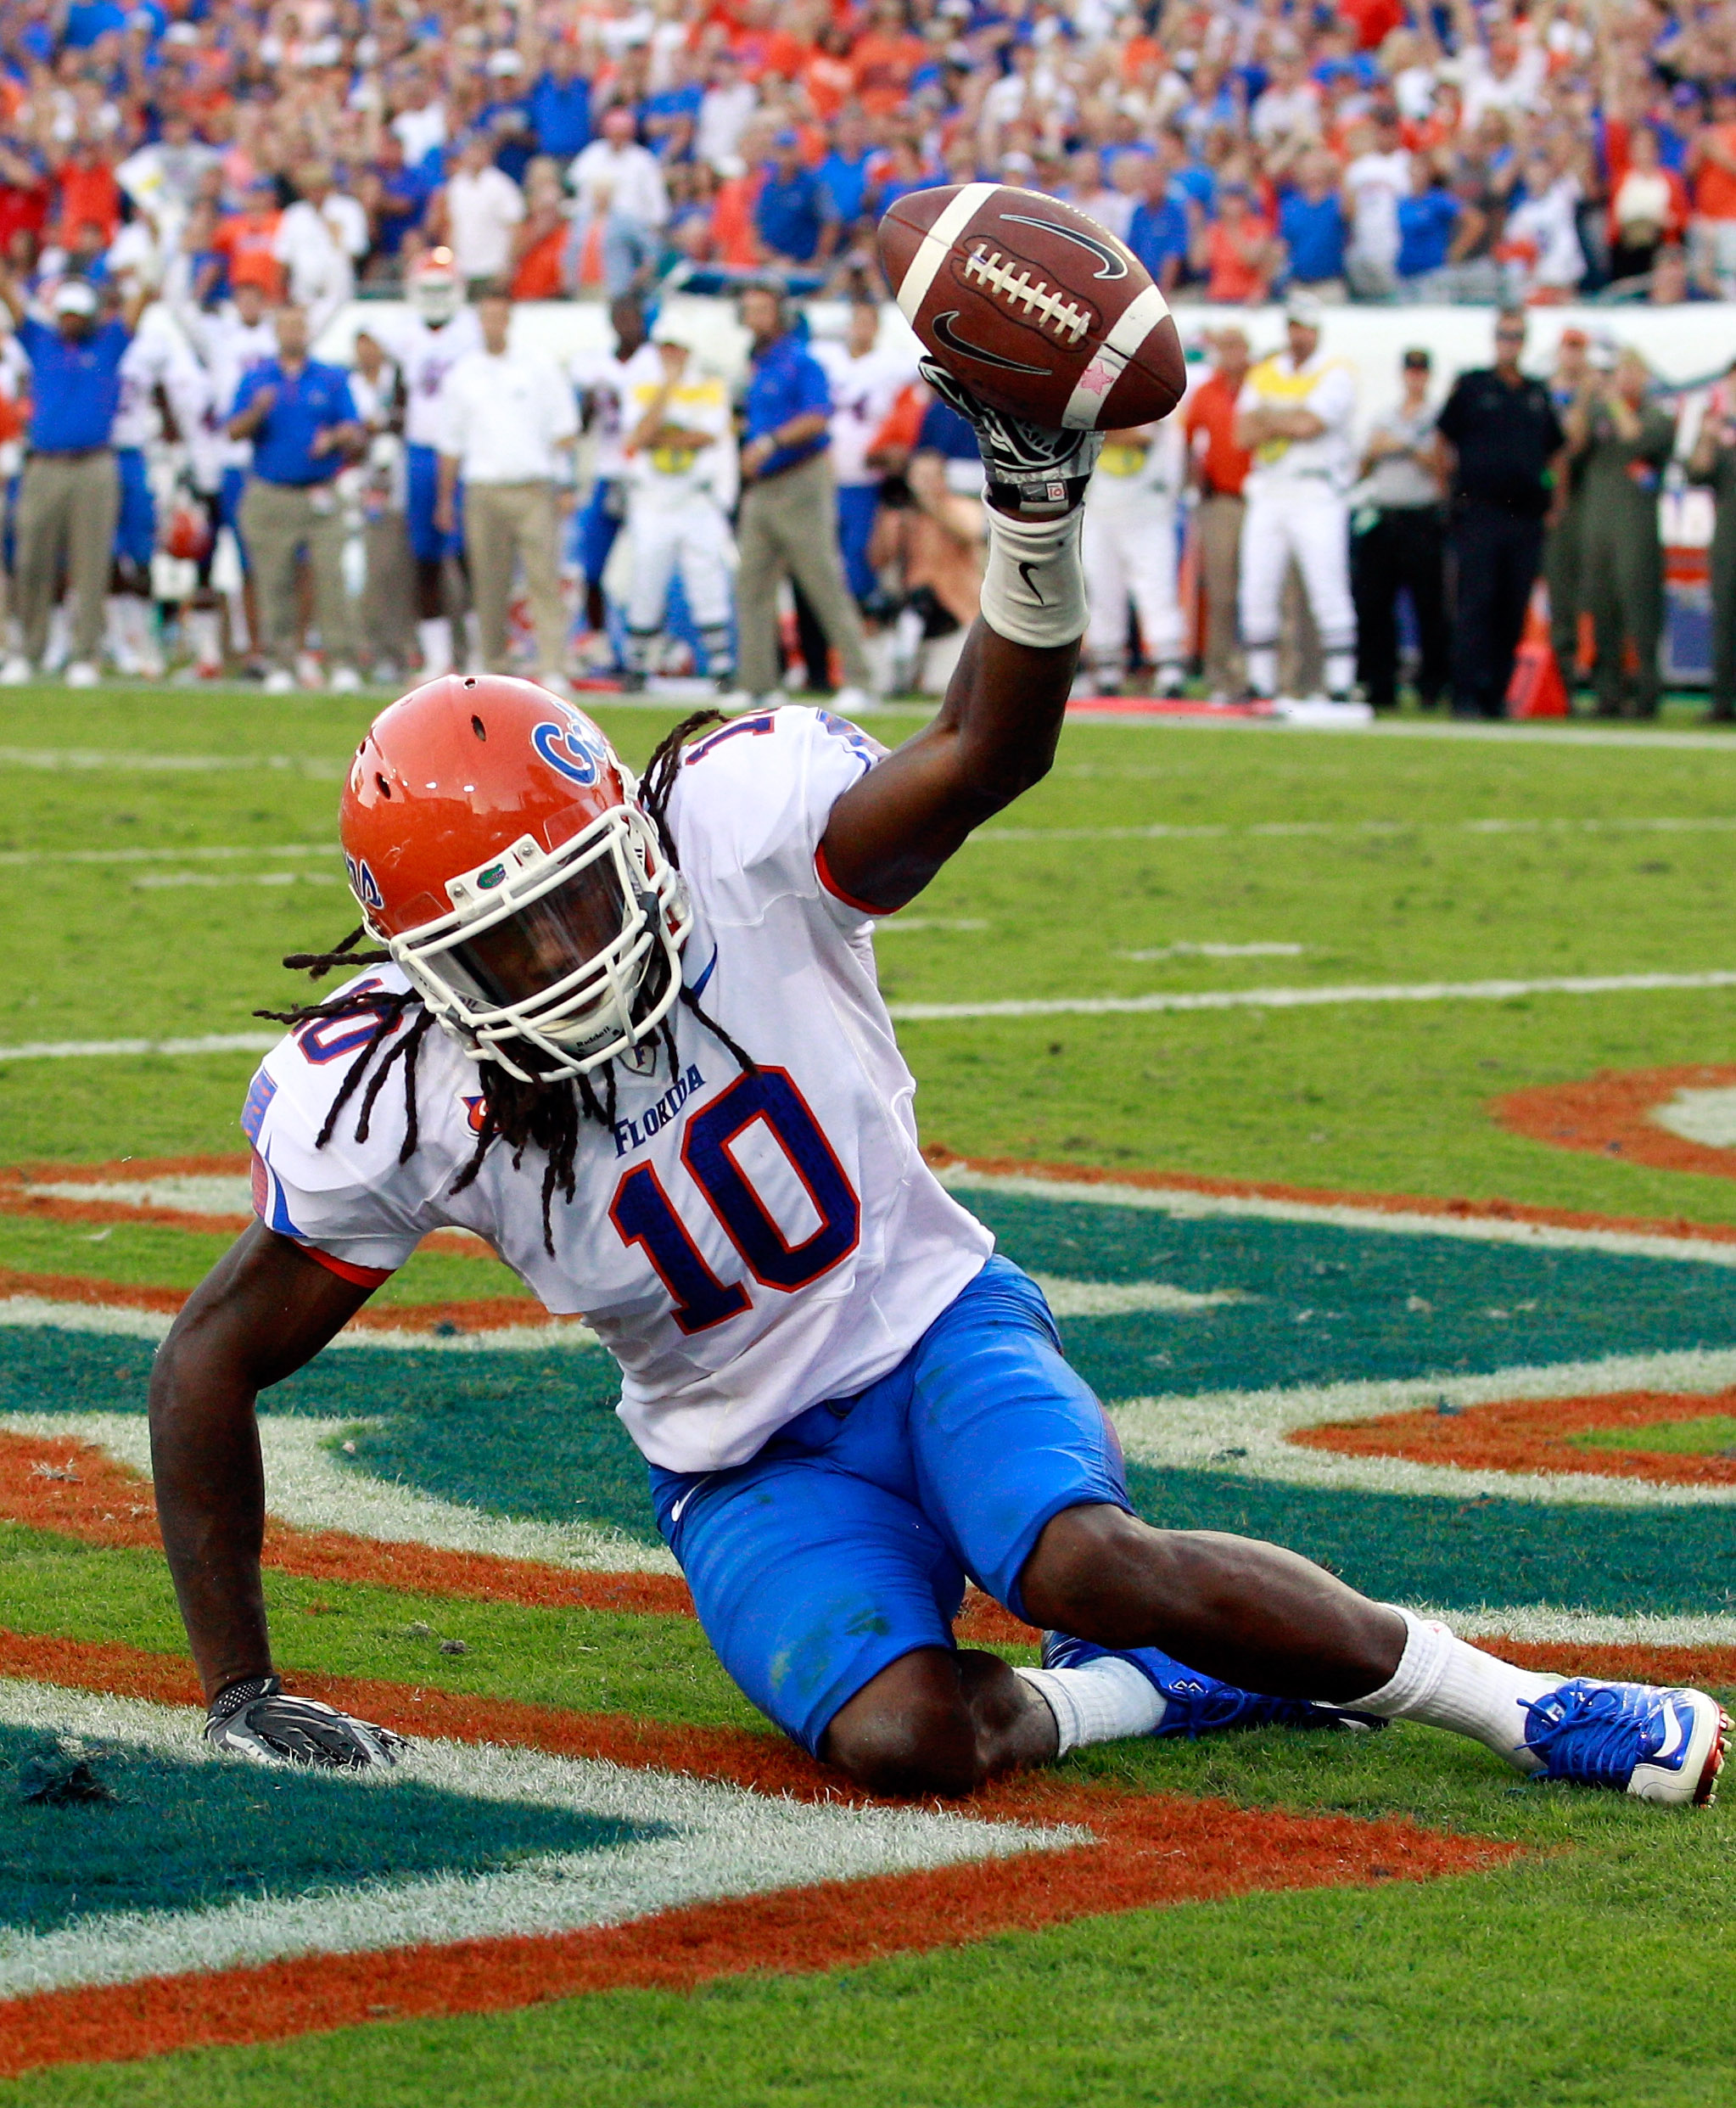 JACKSONVILLE, FL - OCTOBER 30:  Will Hill #10 of the Florida Gators holds up the ball after an interception during the game against the Georgia Bulldogs at EverBank Field on October 30, 2010 in Jacksonville, Florida.  (Photo by Sam Greenwood/Getty Images)